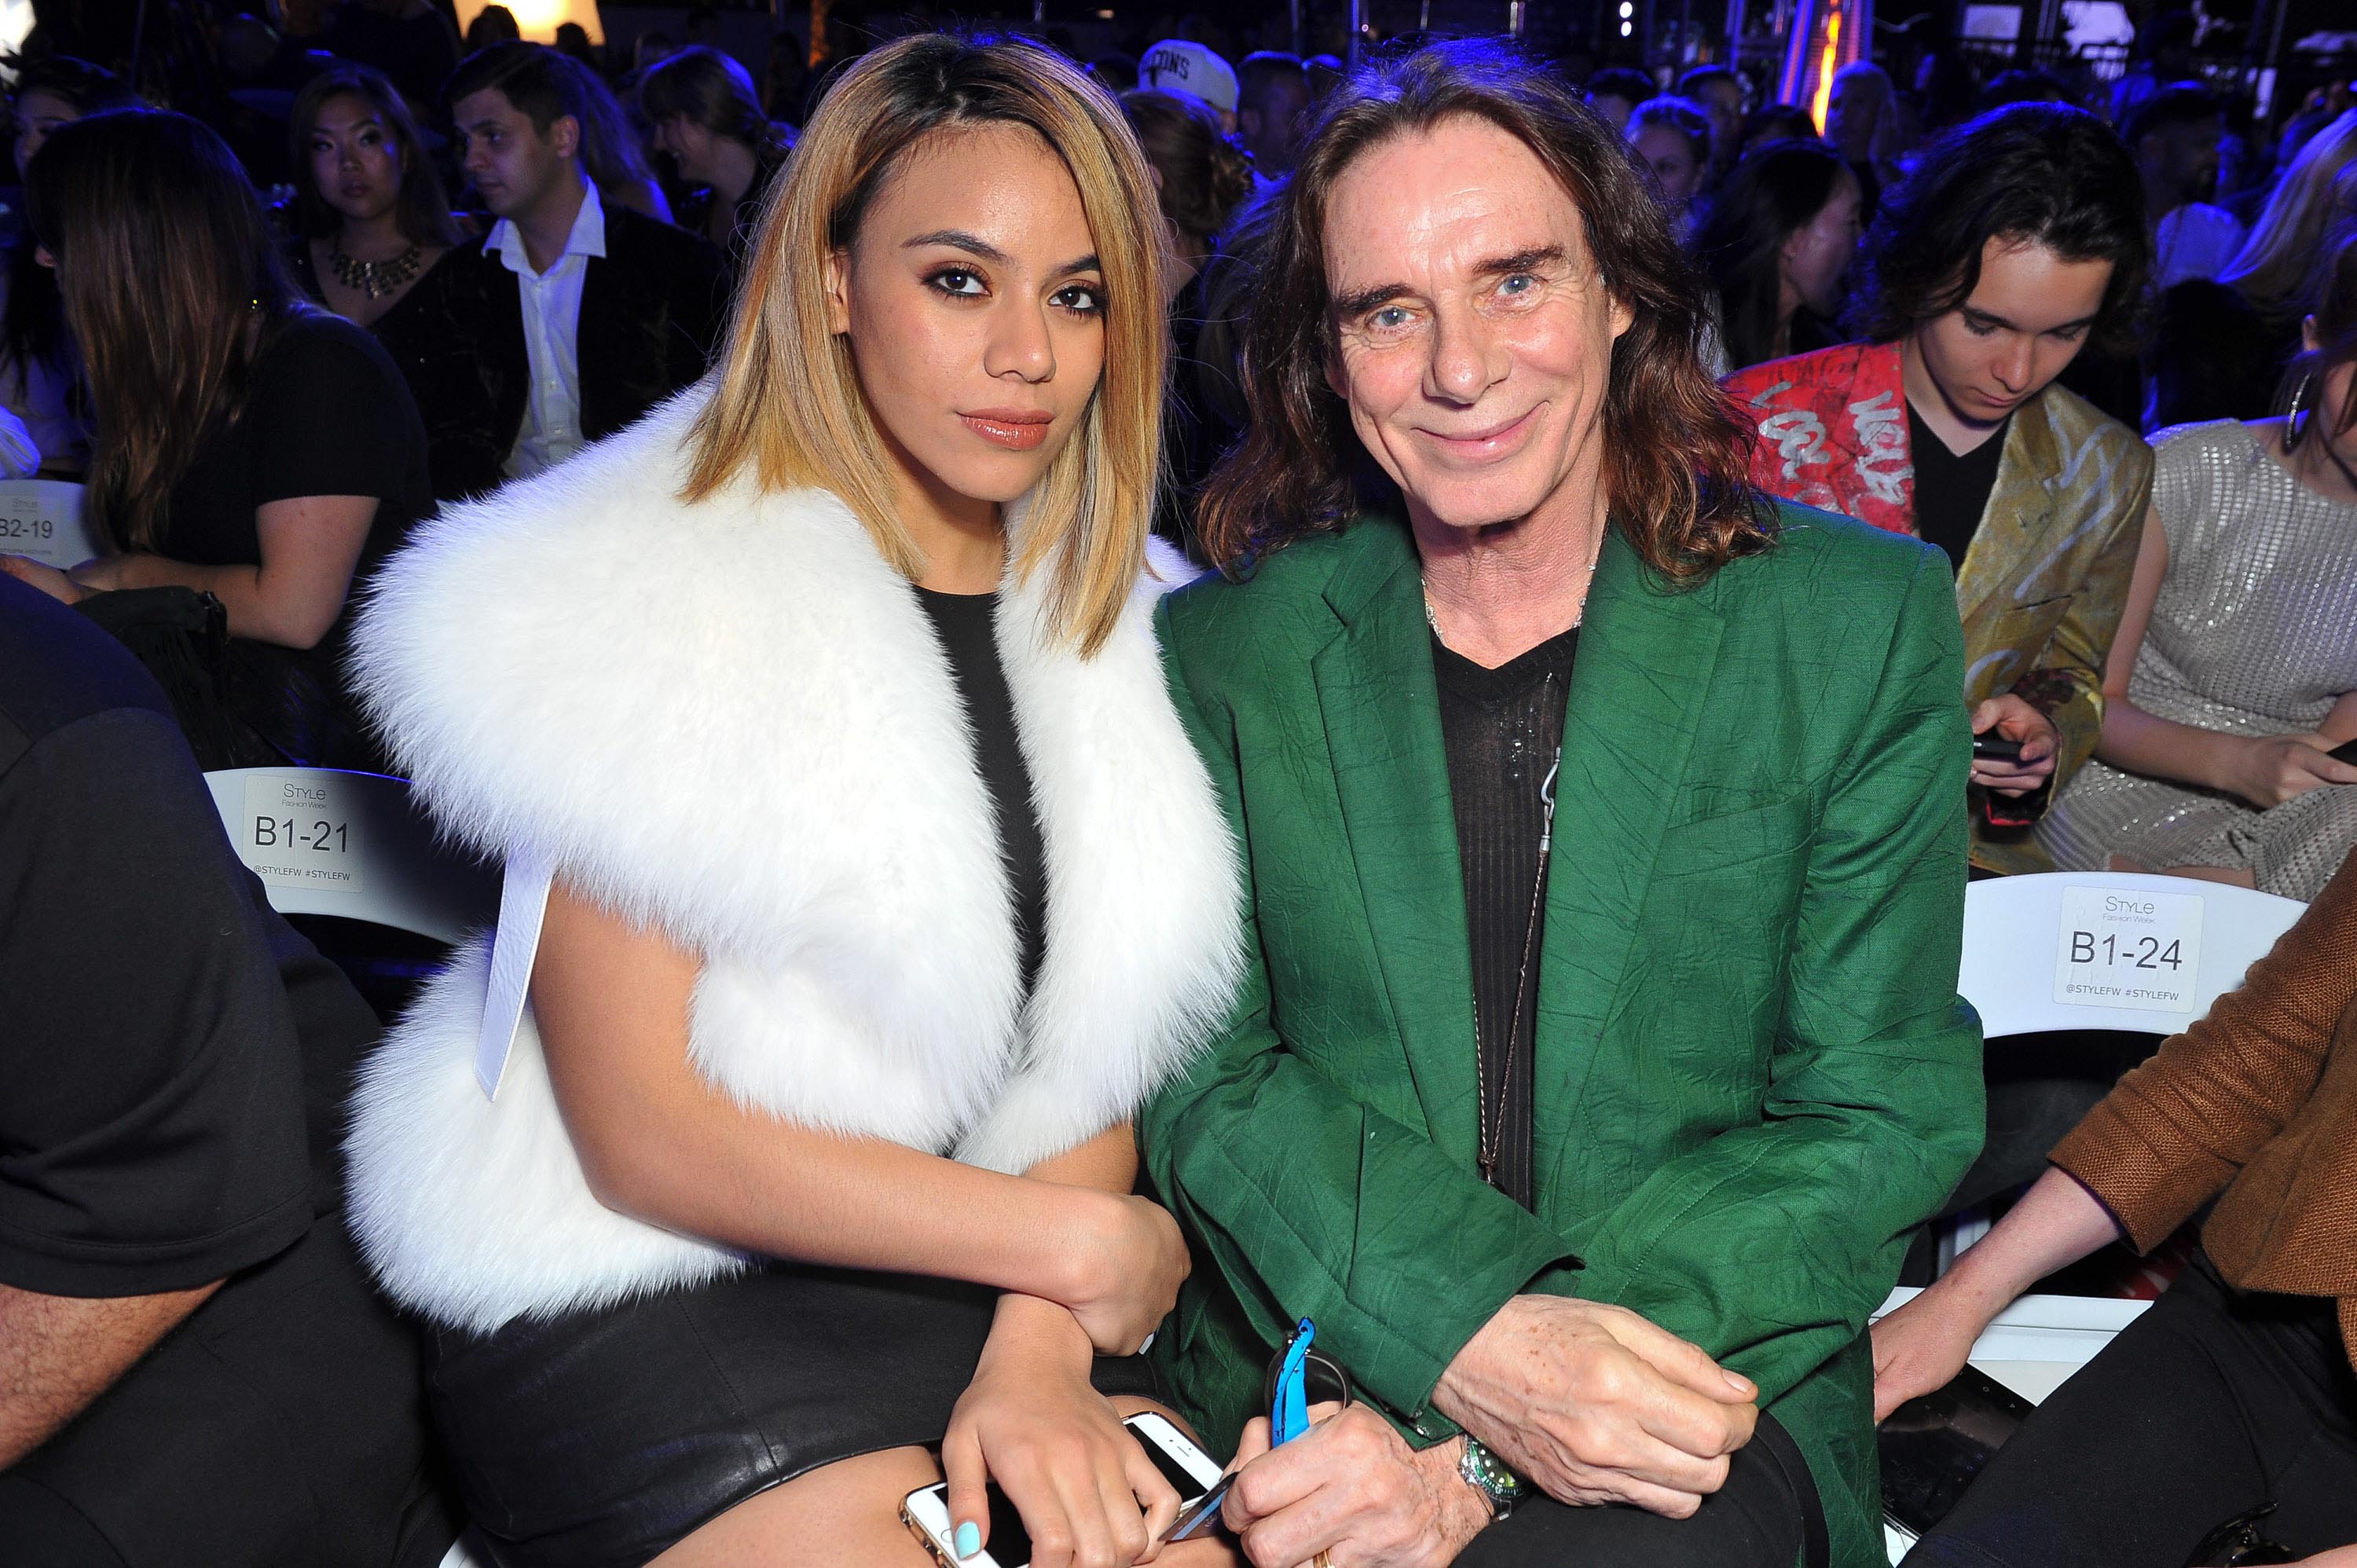 Dinah Jane attends the debut of Thomas Wylde’s ‘Warrior II’ collection